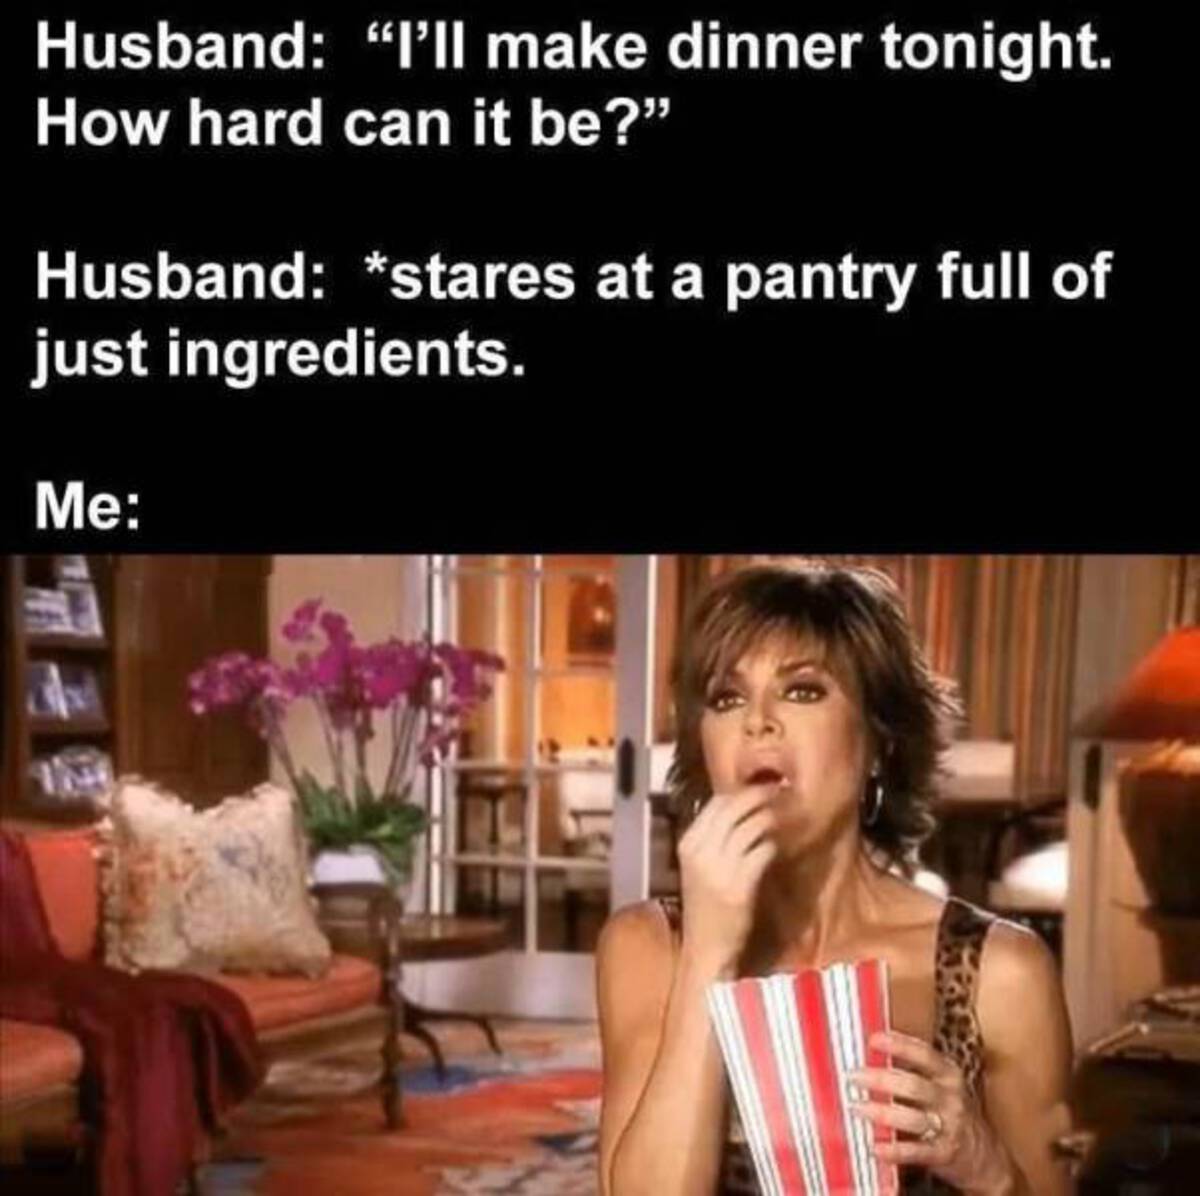 iconic real housewives quotes - Husband "I'll make dinner tonight. How hard can it be?" Husband stares at a pantry full of just ingredients. Me